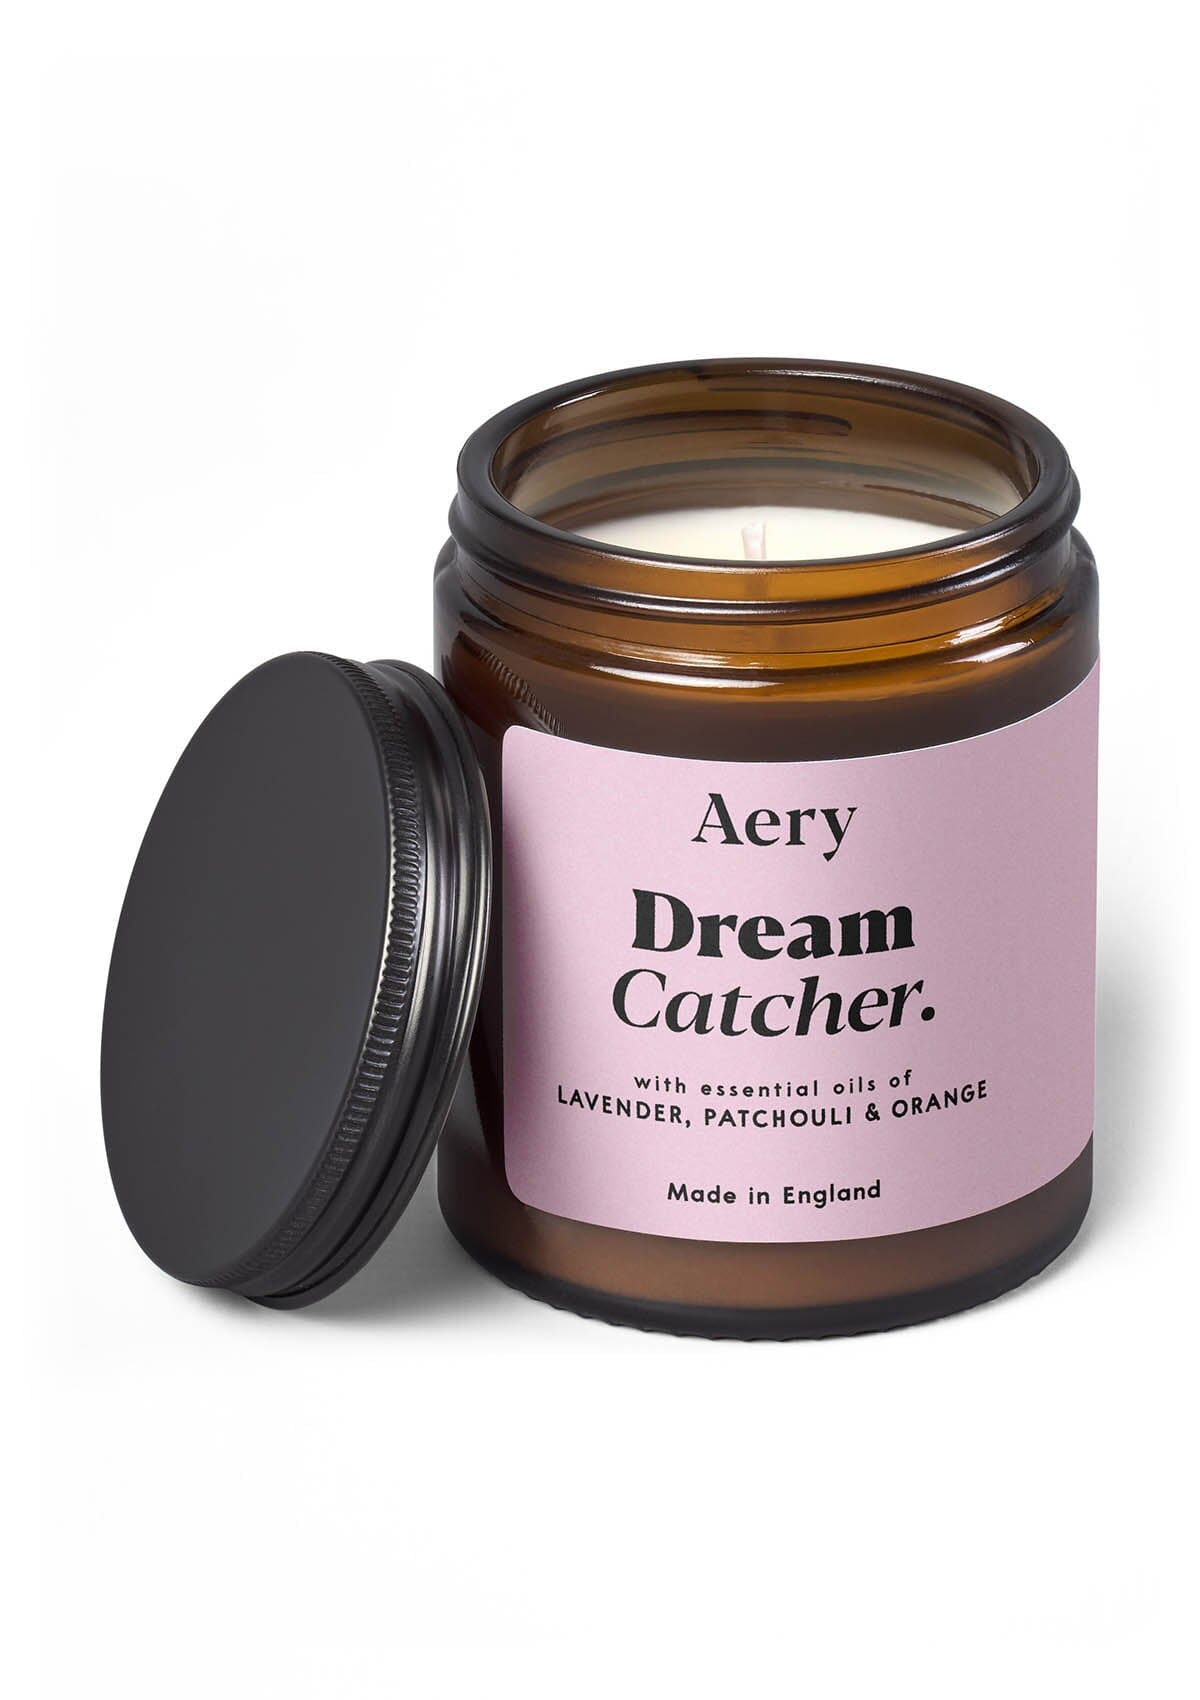 Dream Catcher jar candle by Aery on white candle 